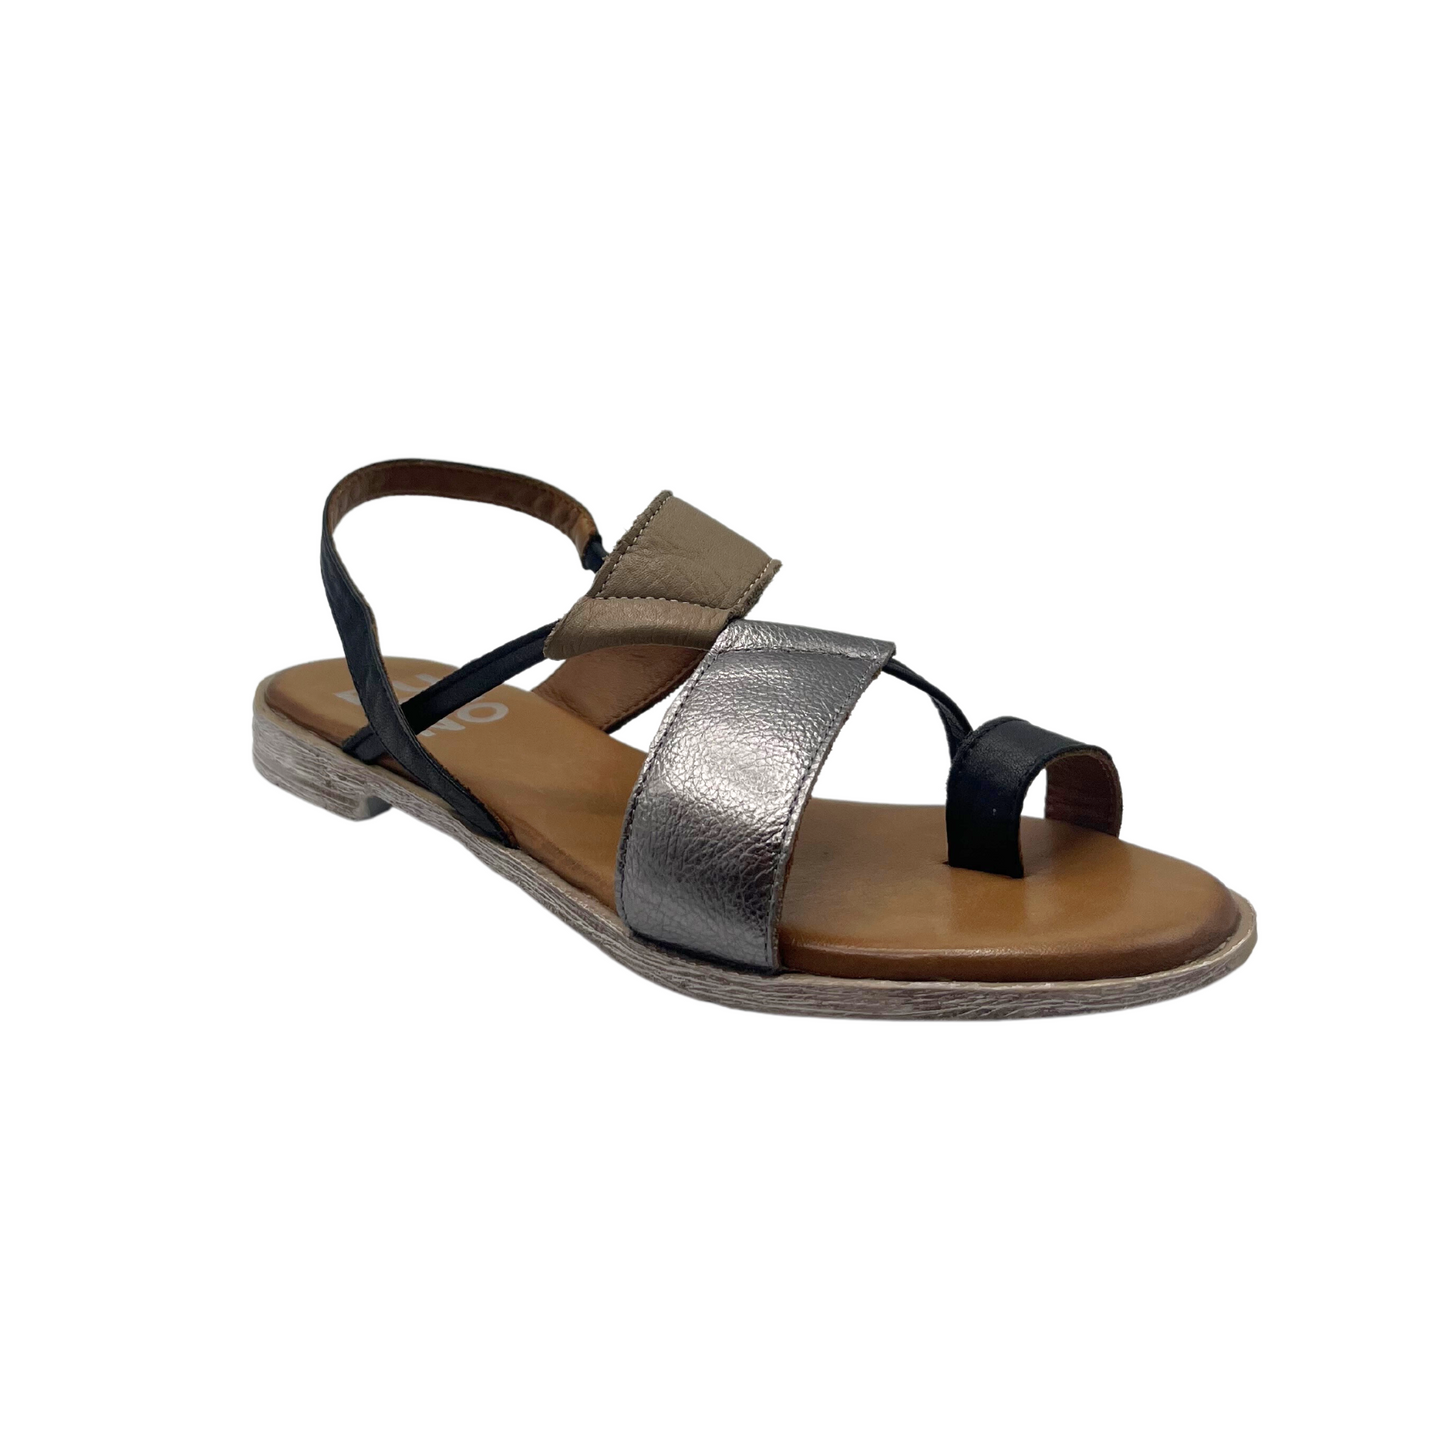 Angled front view of a flat, slip on style sandal with a heel strap and toe loop.  Shown in a leather combo of black, silver and tan